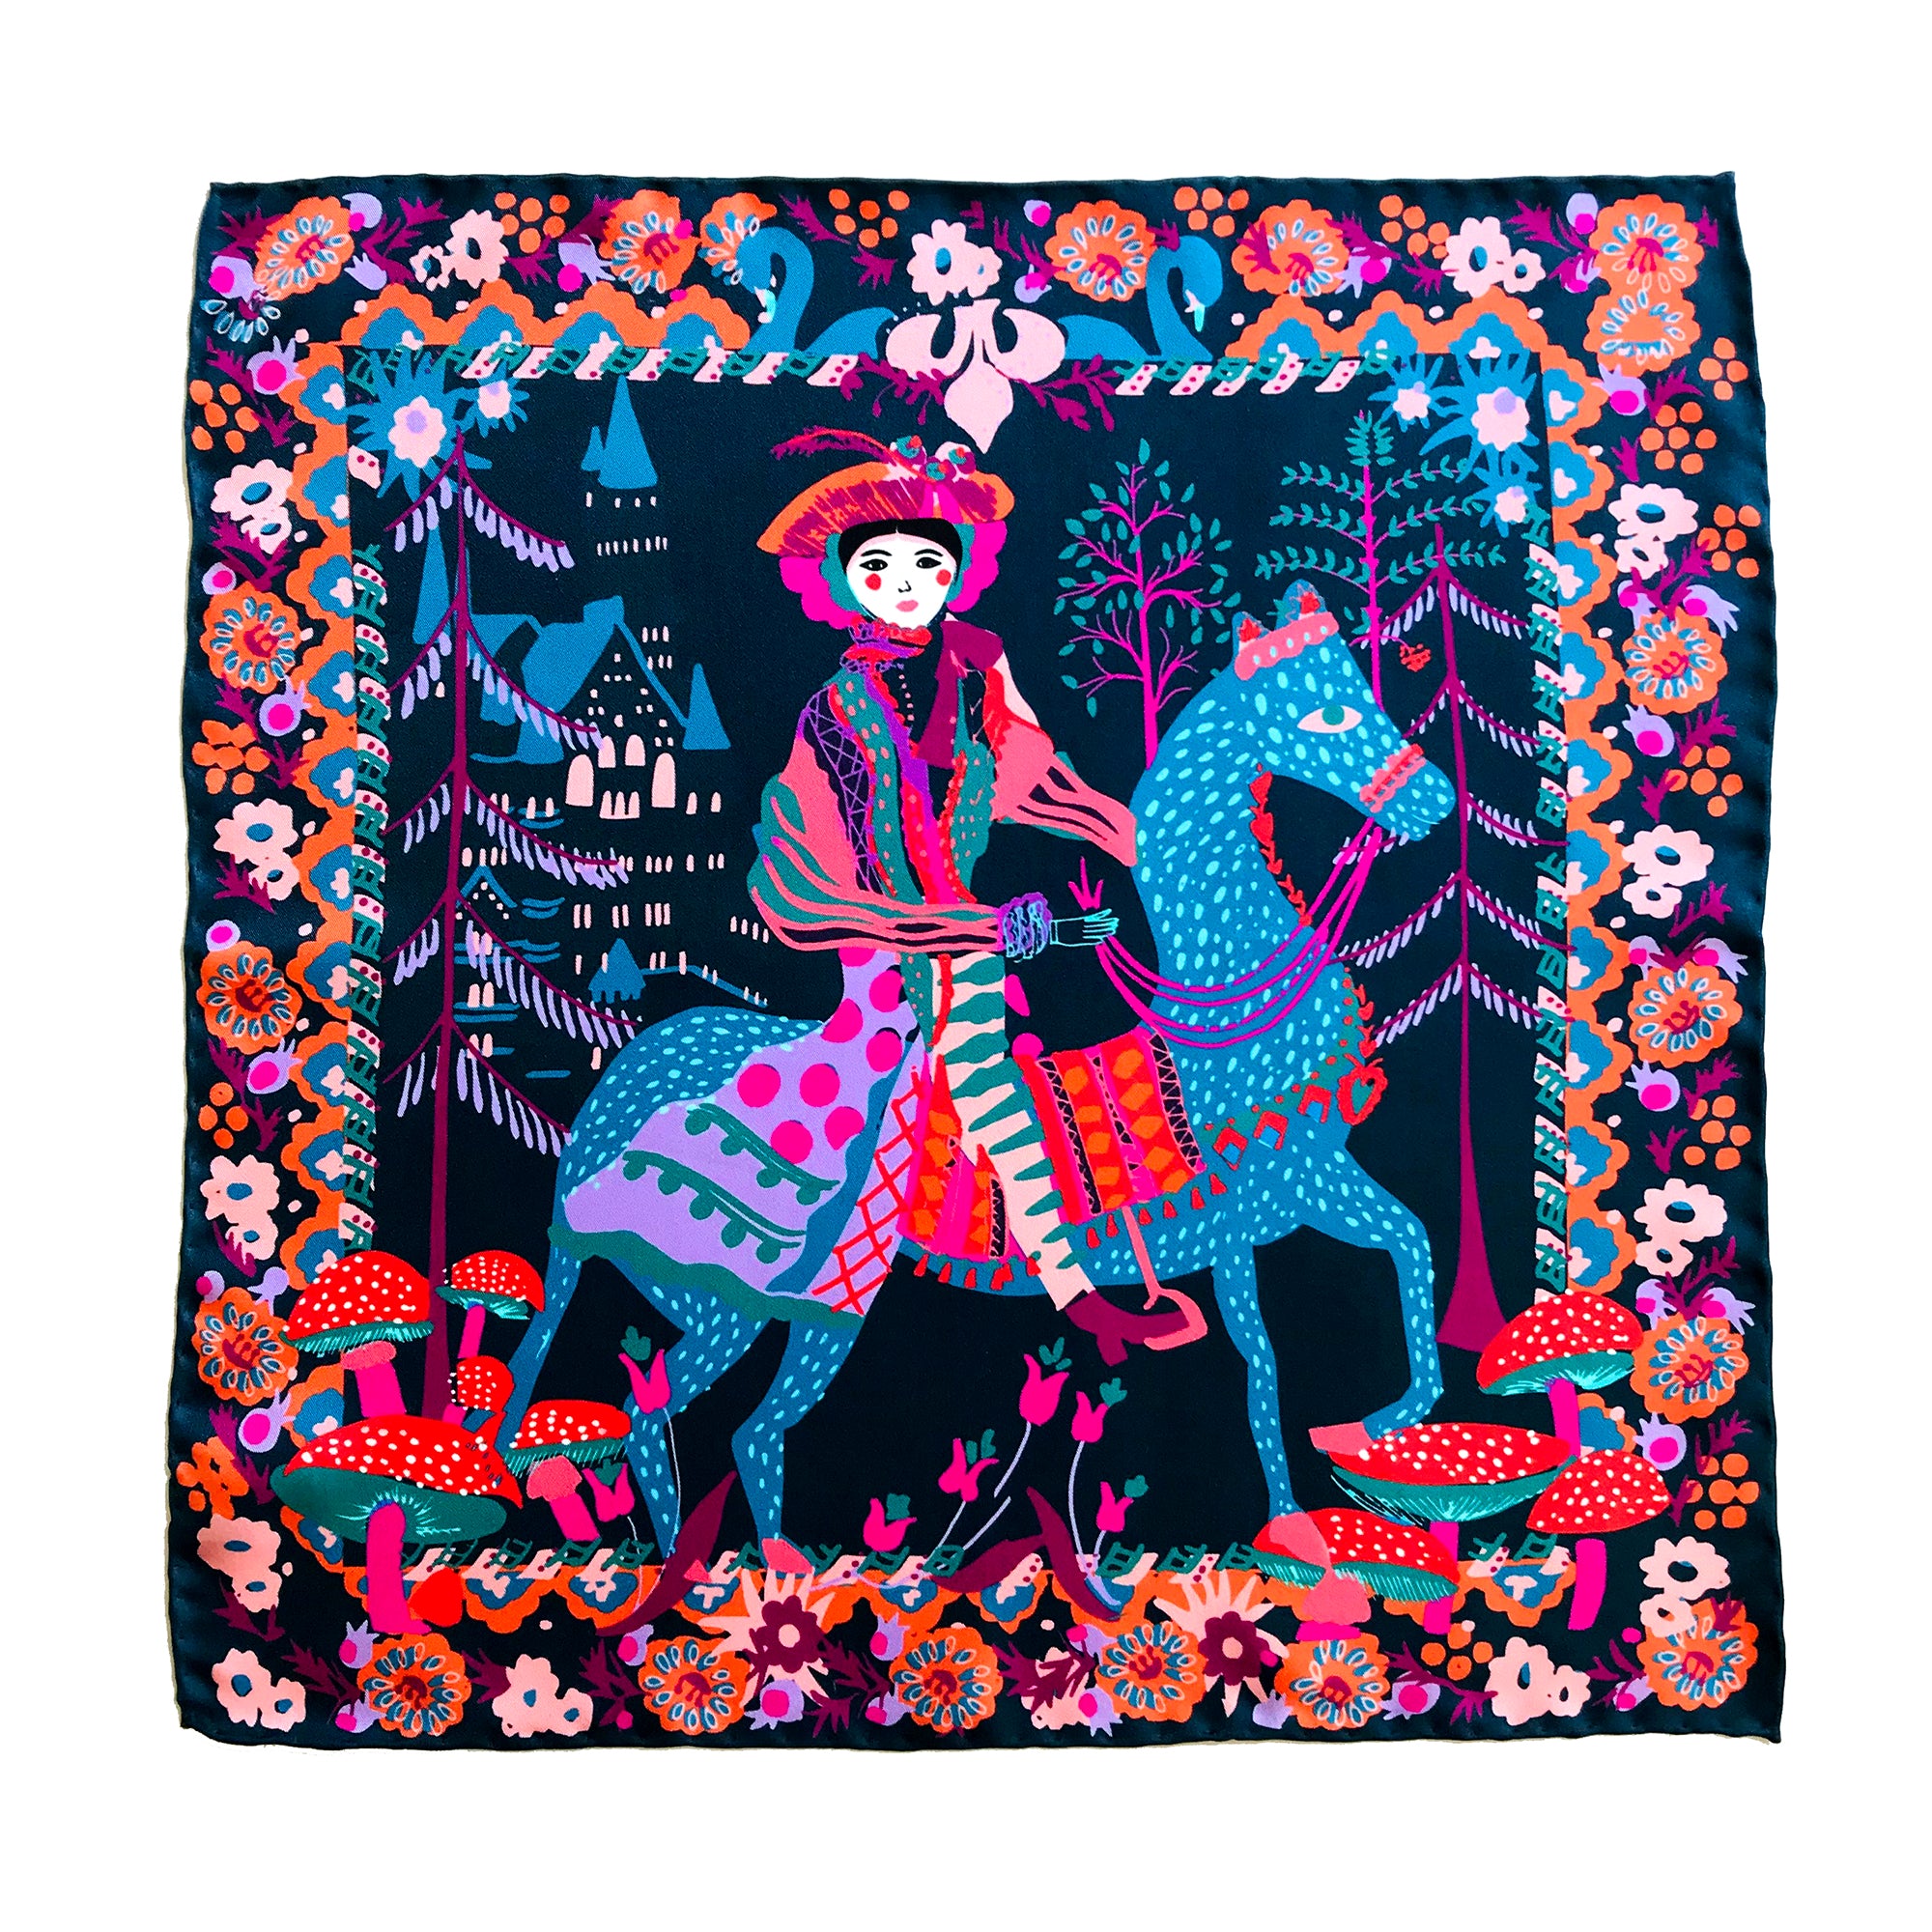 Silk pocket square designed by Crimson Rose featuring an original illustration of a knight riding a horse in a forest with a castle in the background by Crimson Rose O'Shea. Colours are deep blue, greens, reds, pinks and oranges.